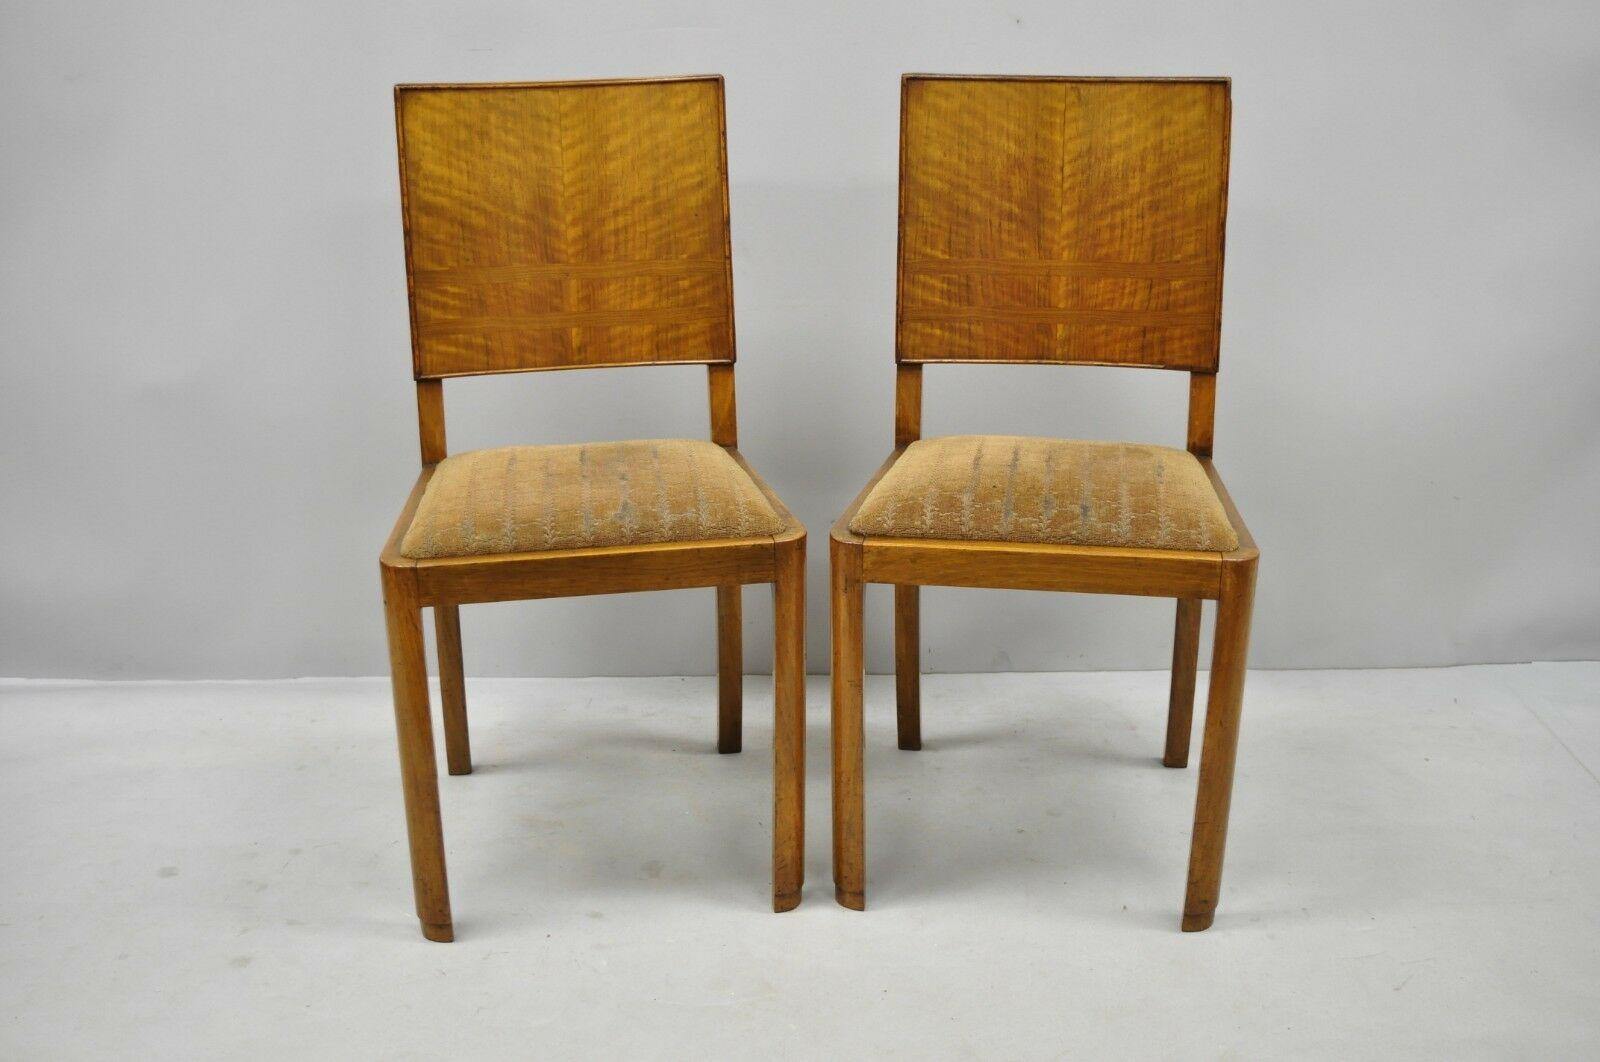 Set of 4 French Art Deco mahogany inlaid dining side chairs. Items feature curved inlaid backs, drop seats, beautiful wood grain, clean modernist lines, circa 1940. Measurements: 35